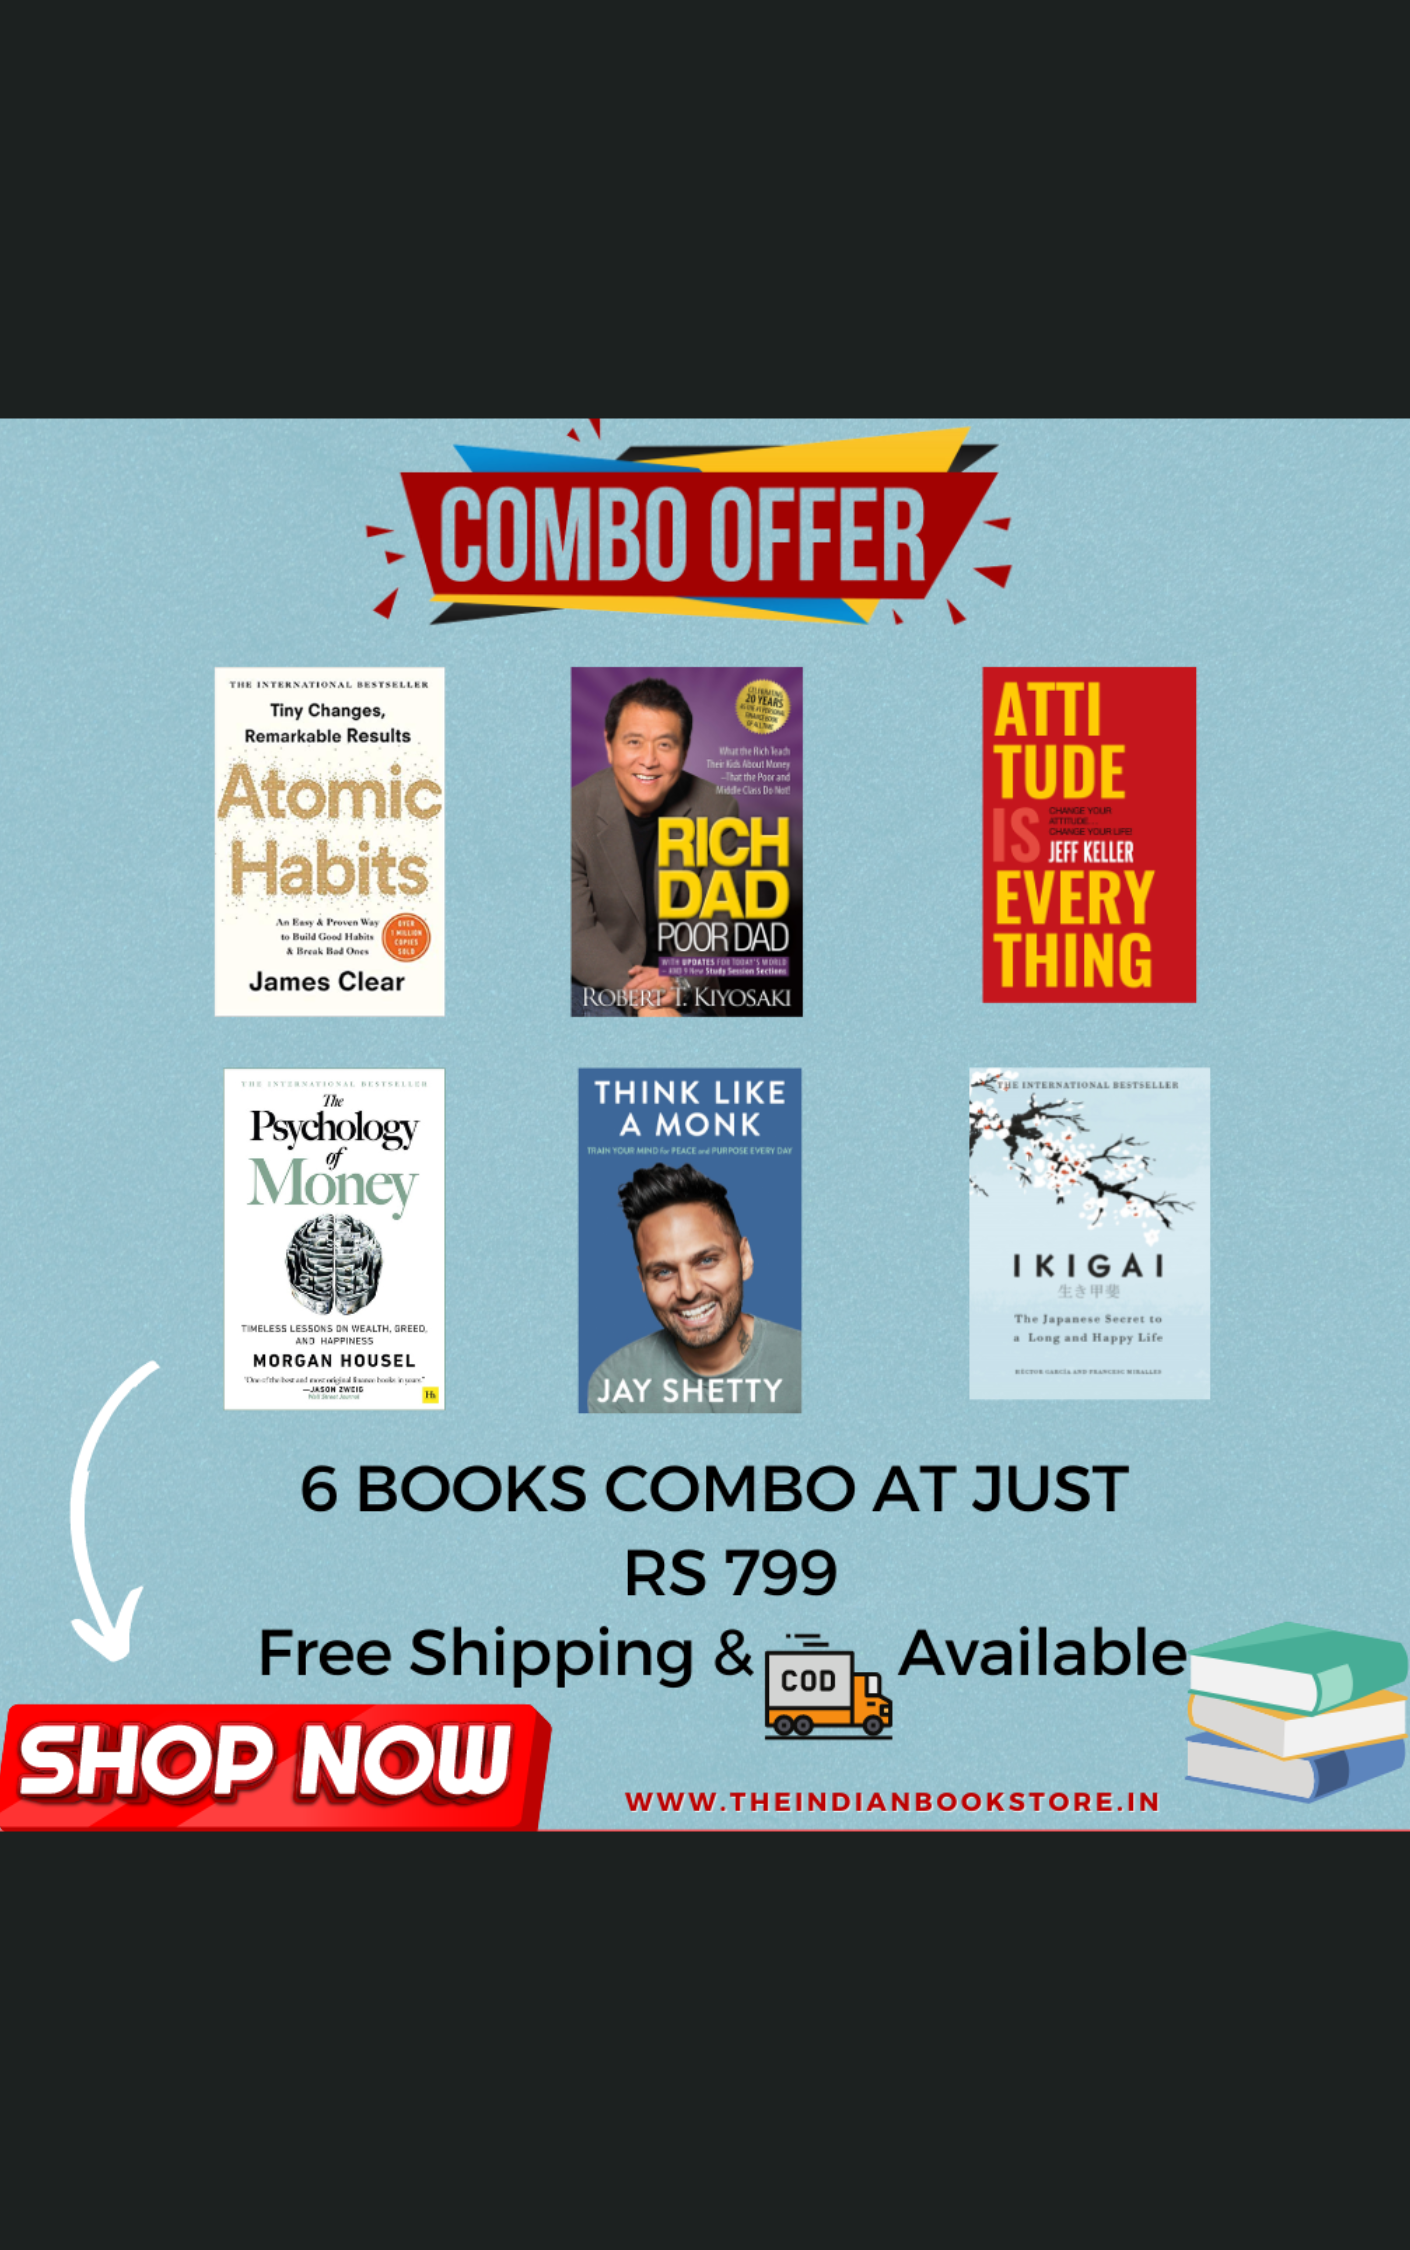 Self help books combo | Think like a monk | Ikigai | Rich dad poor dad | Attitude is everything | Atomic habit | The psychology of money